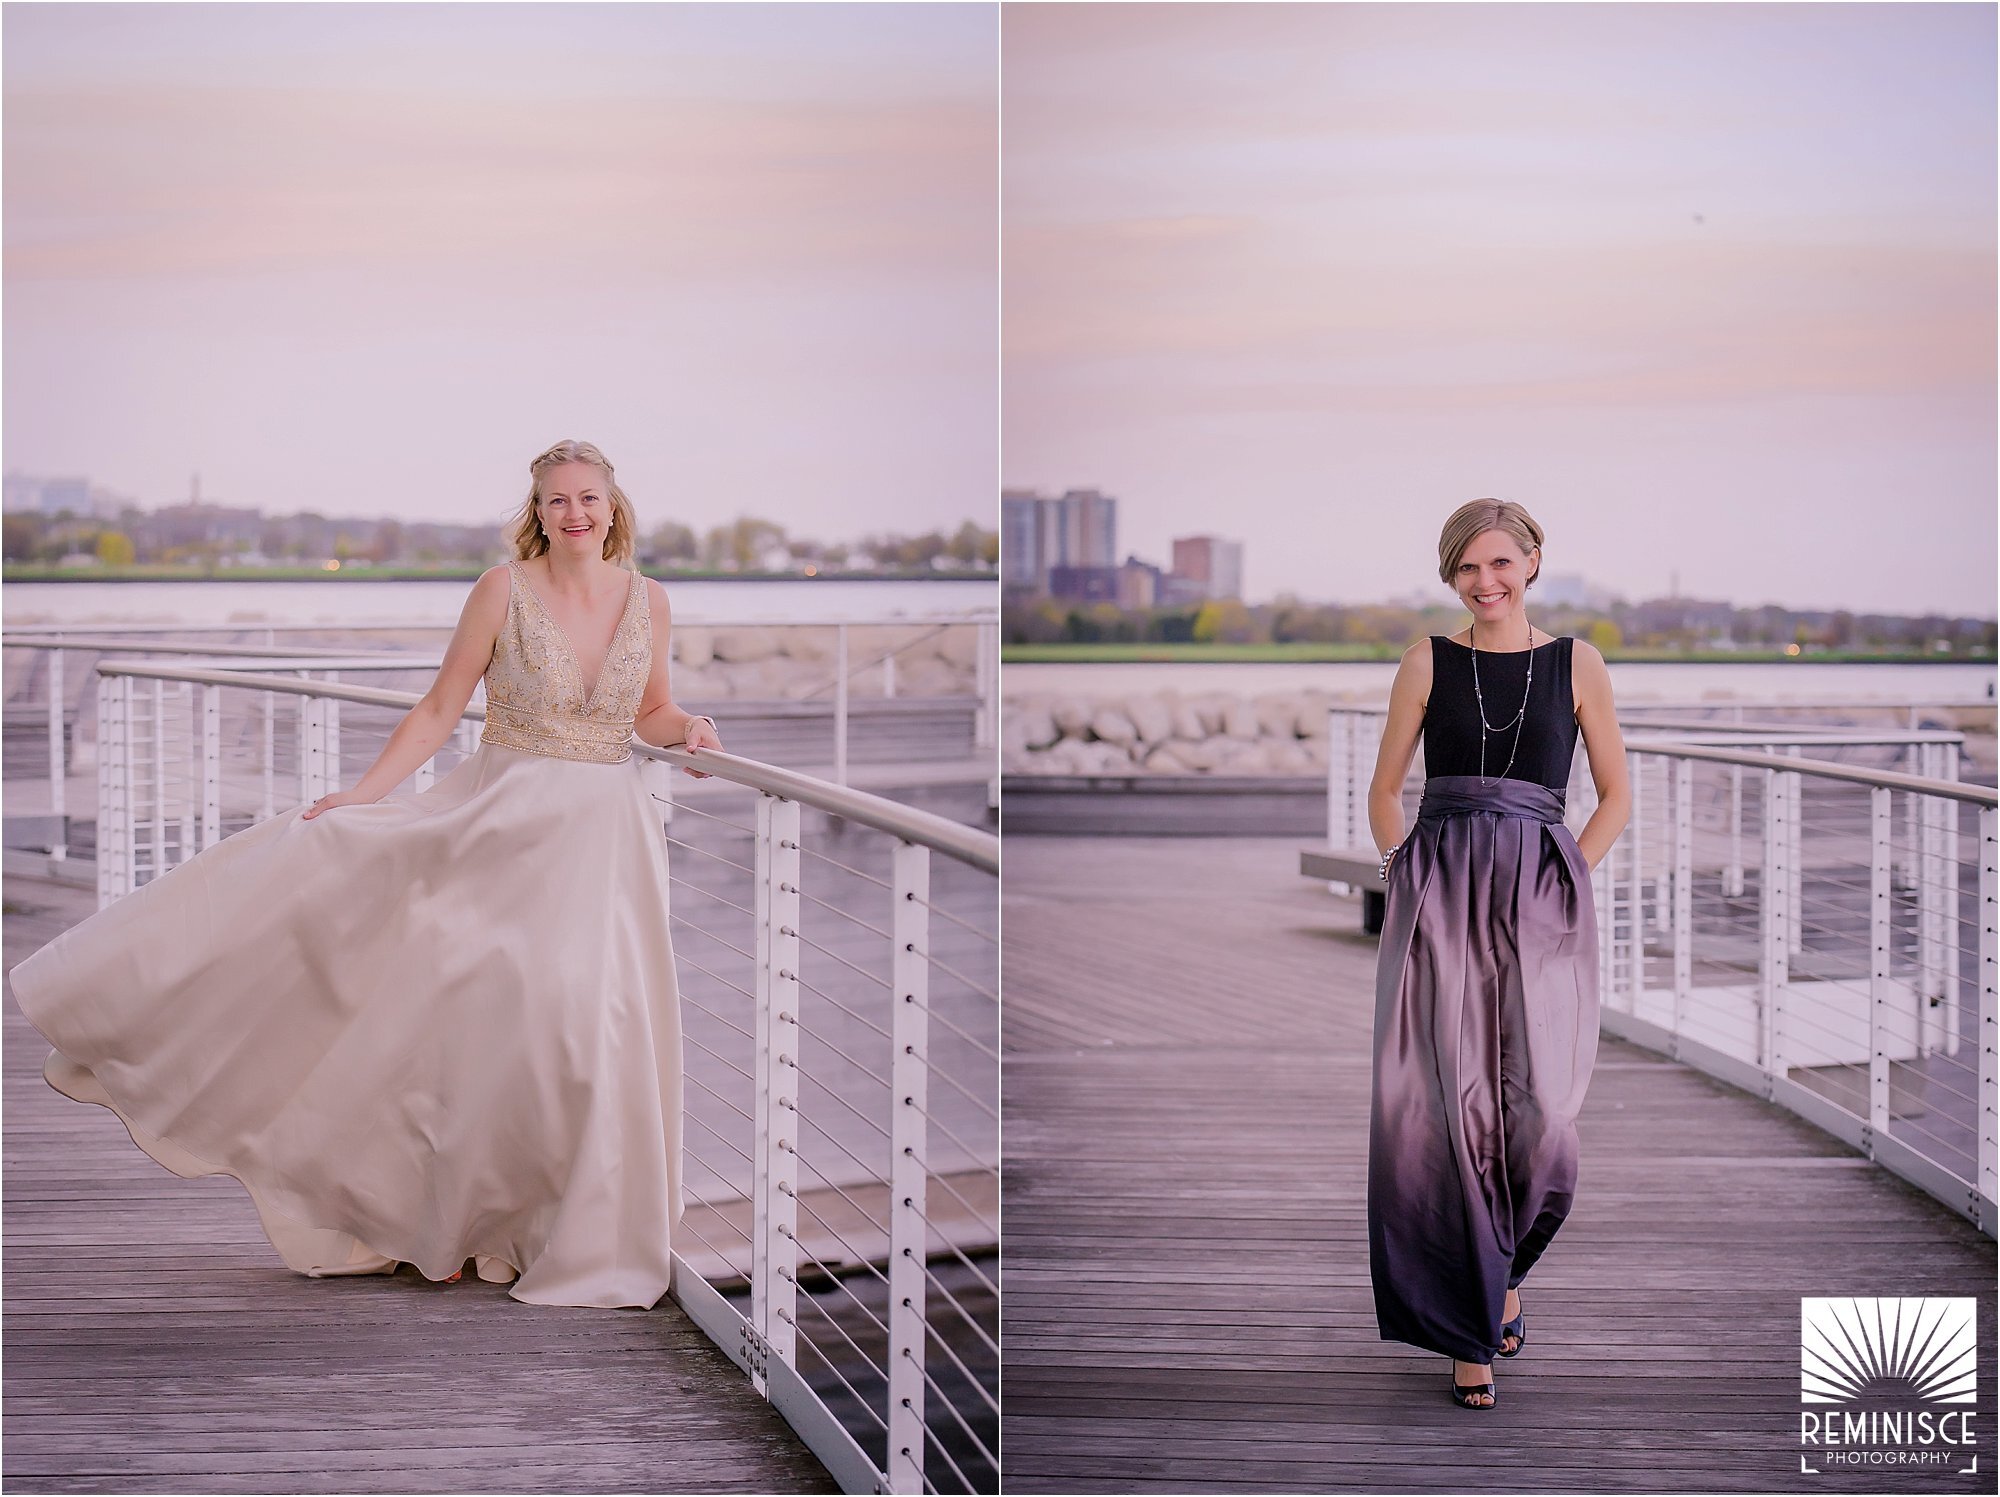 05-on-location-portraits-milwaukee-lakefront-downtown-evening-women-full-length-gowns.jpg